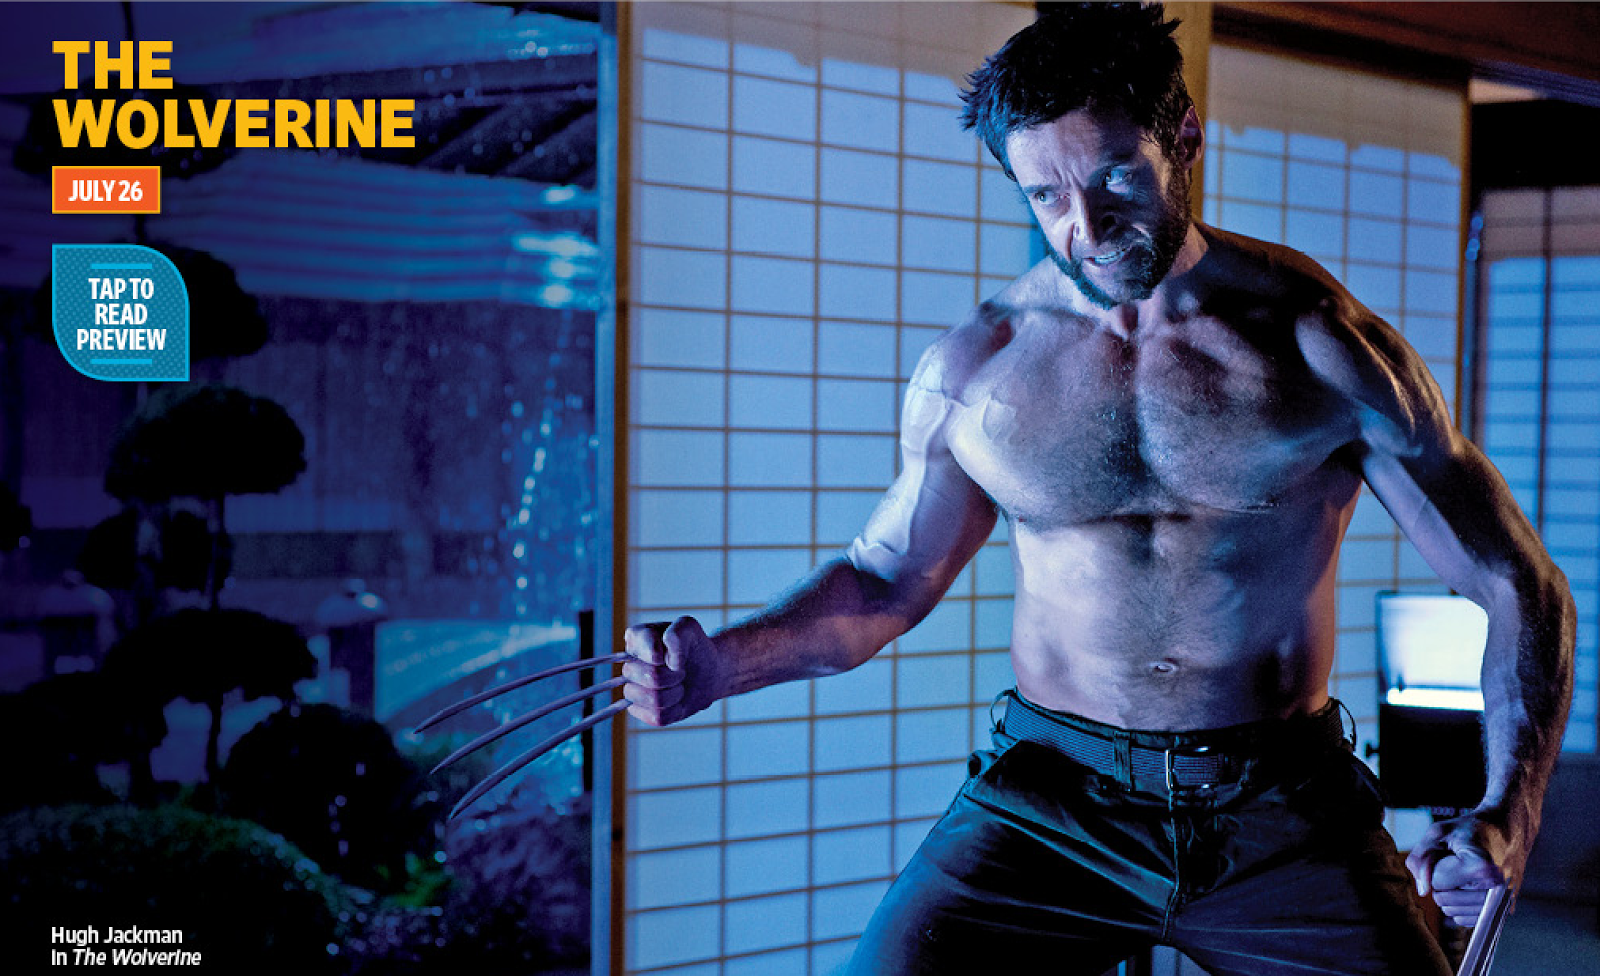 Hugh Jackman in new image from The Wolverine